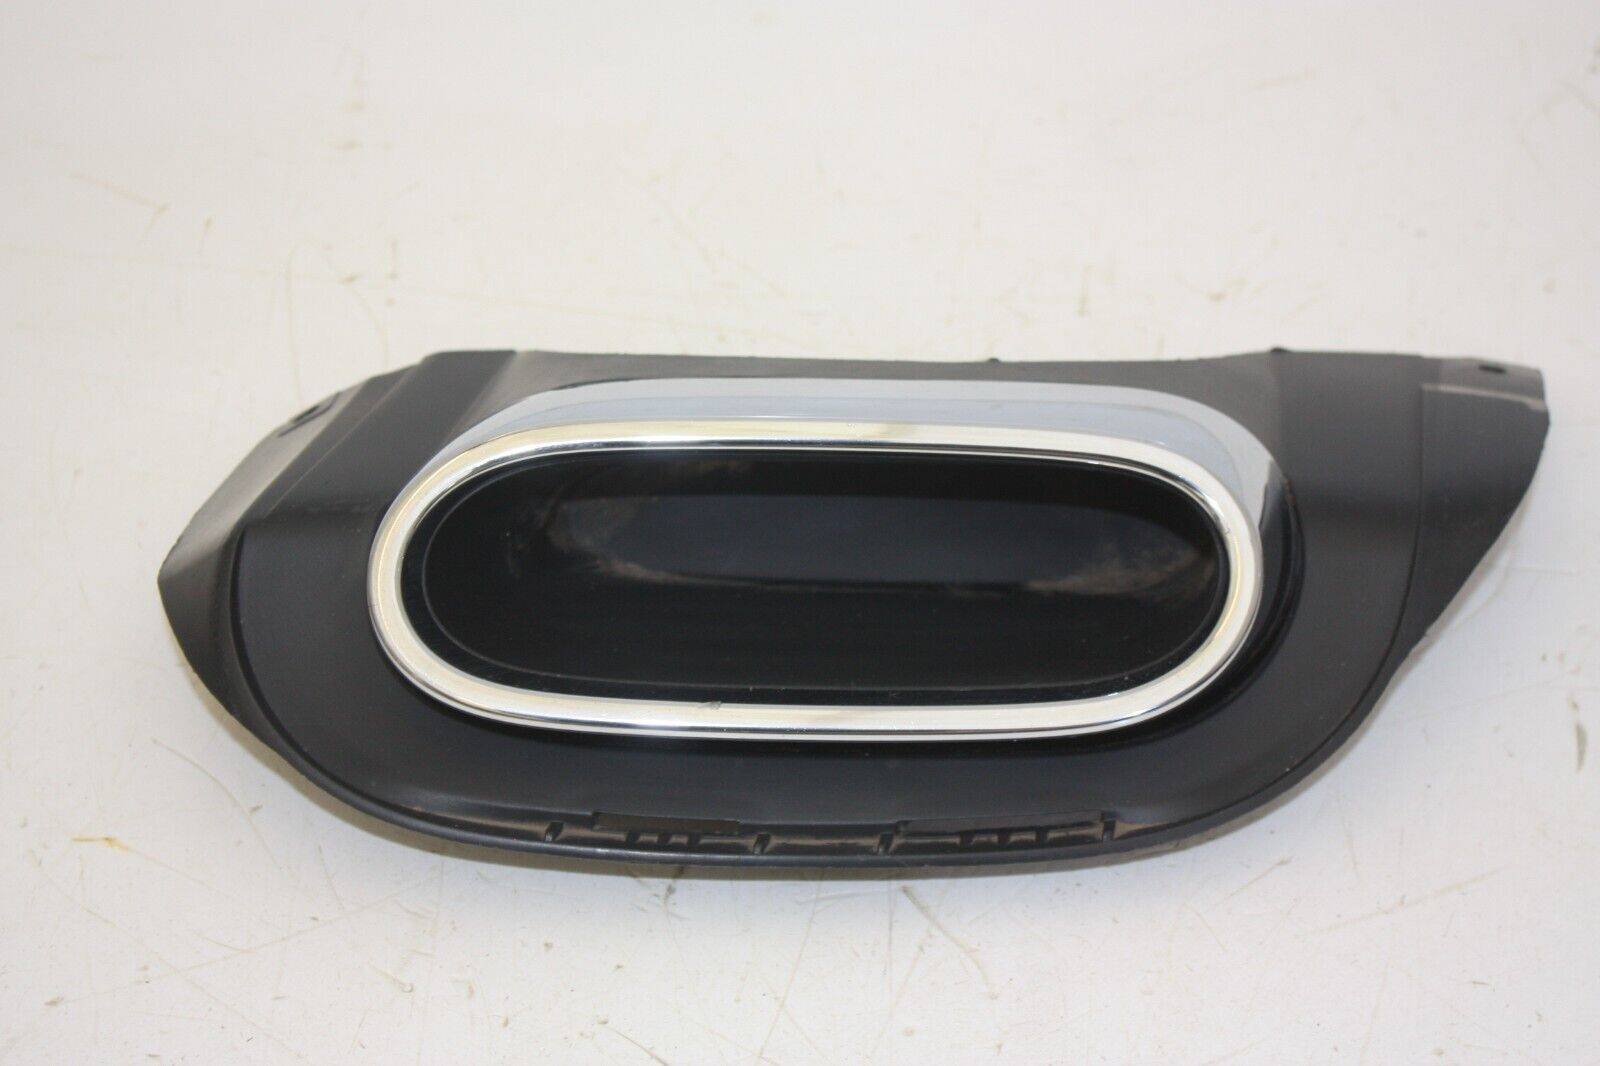 Mercedes GLA H247 Rear Left Exhaust Tail Pipe Trim 2020 ON A2478850606 Genuine 176291519130